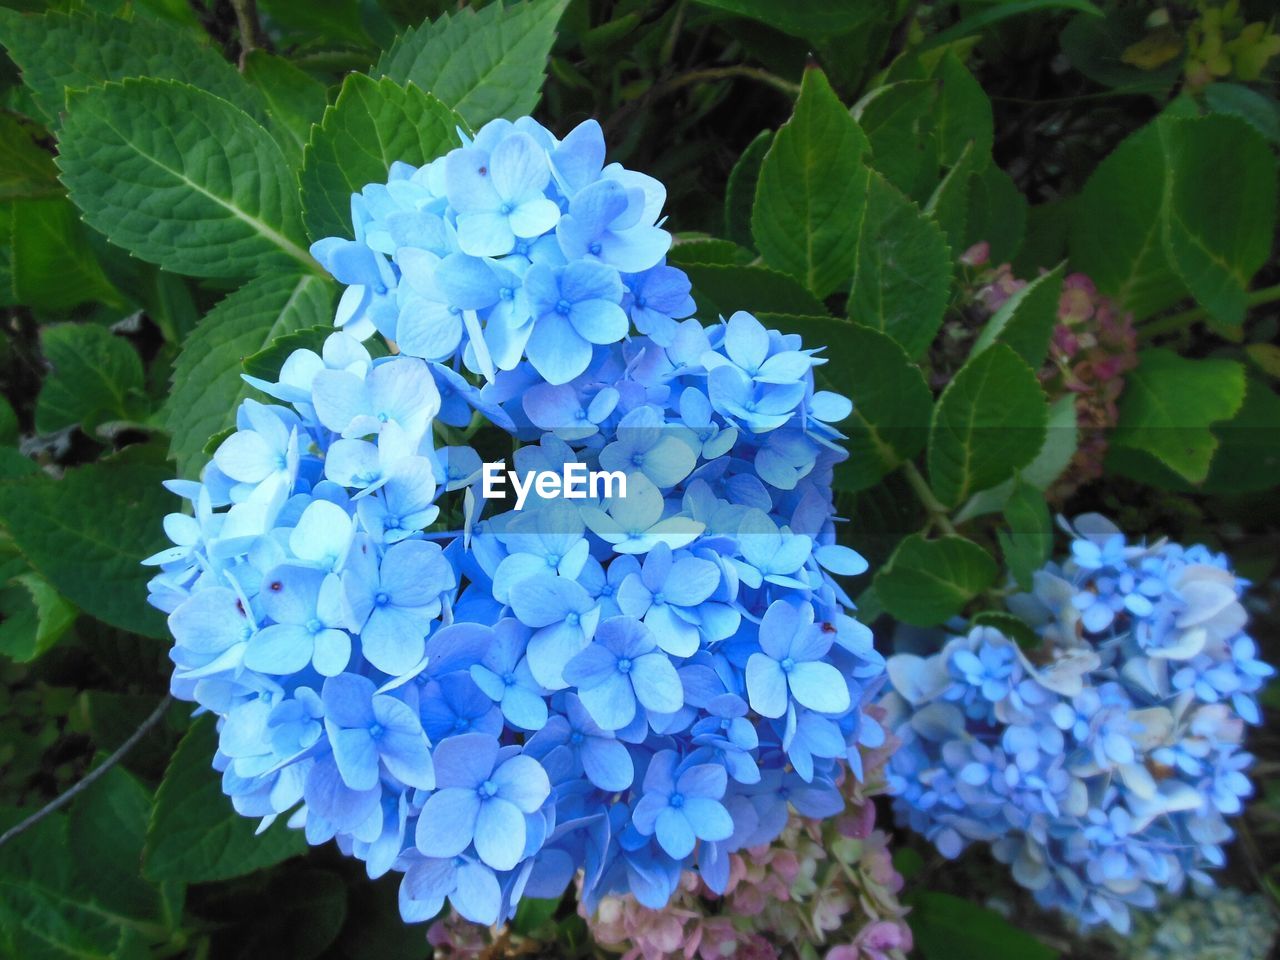 CLOSE-UP OF BLUE HYDRANGEA BLOOMING IN GARDEN